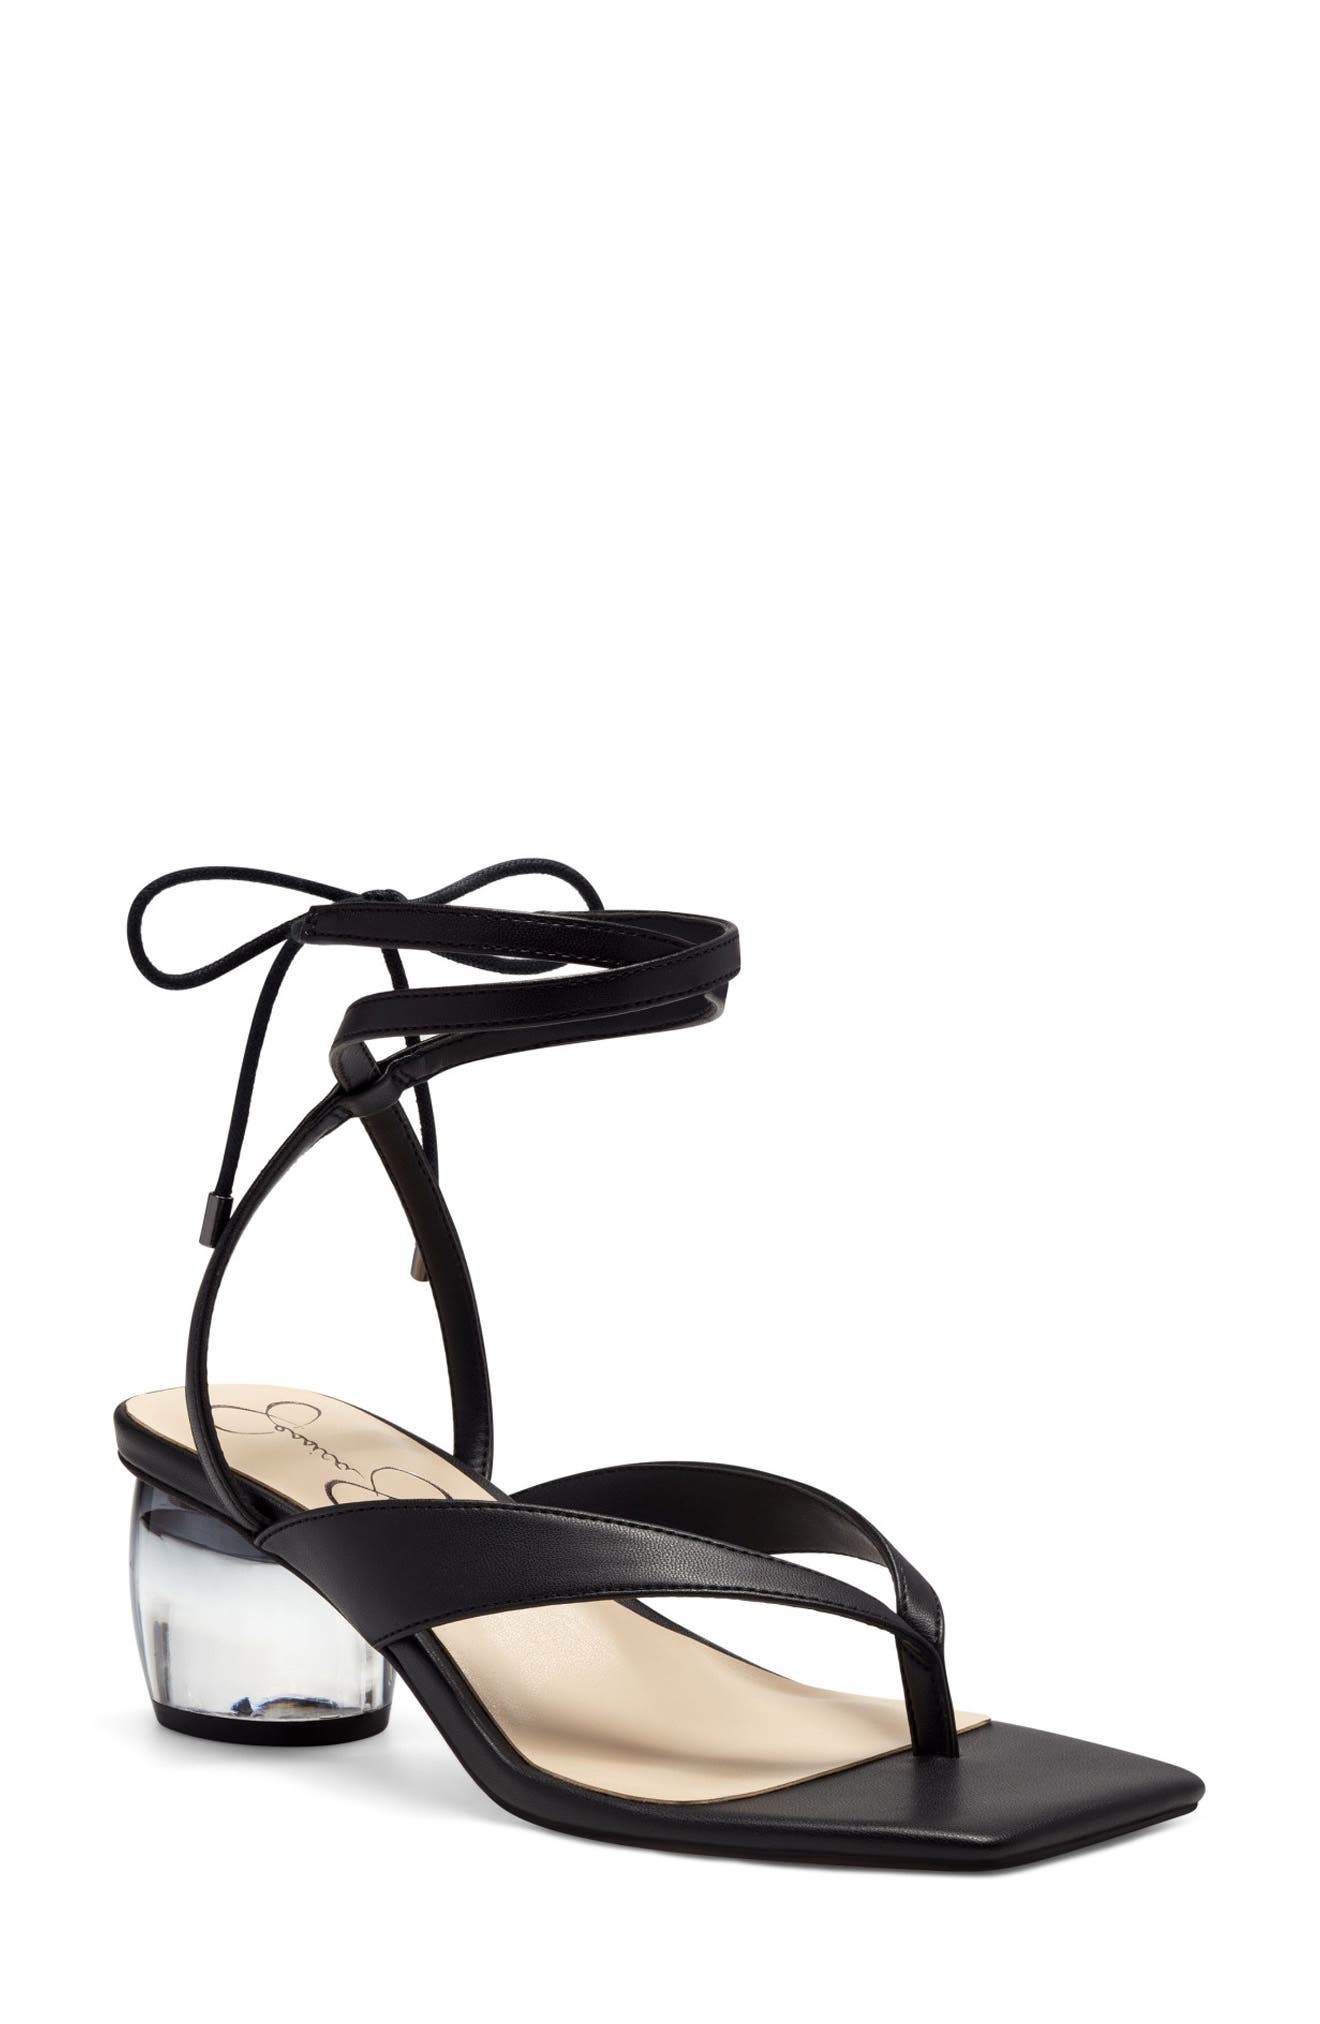 Jessica Simpson Ankle Strap Sandals for ...